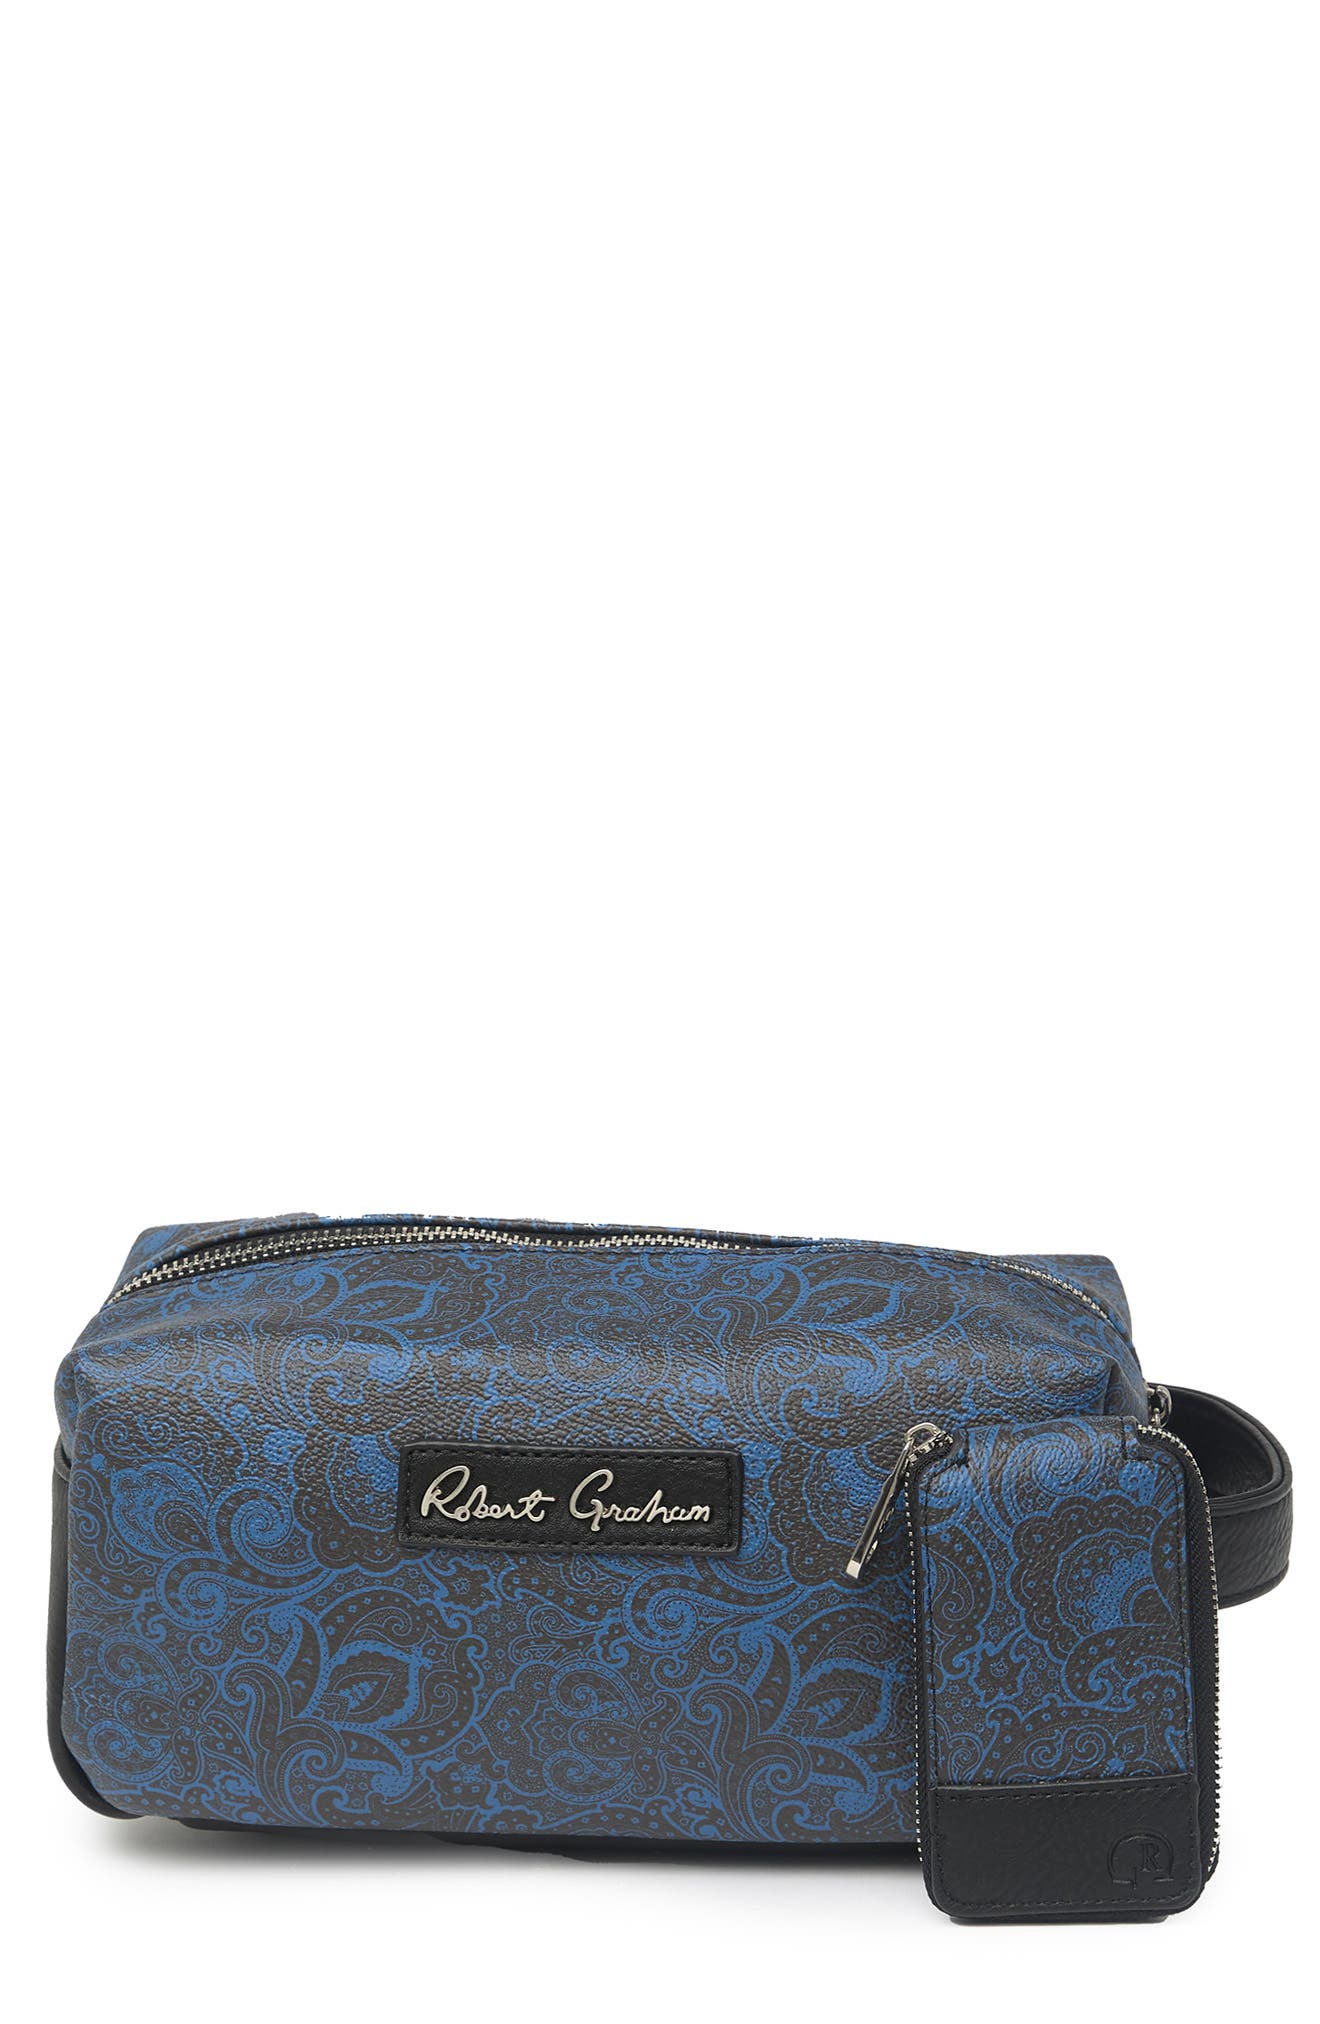 Robert Graham Momentus Feathers Toiletry Bag in Blue for Men Mens Bags Toiletry bags and wash bags 